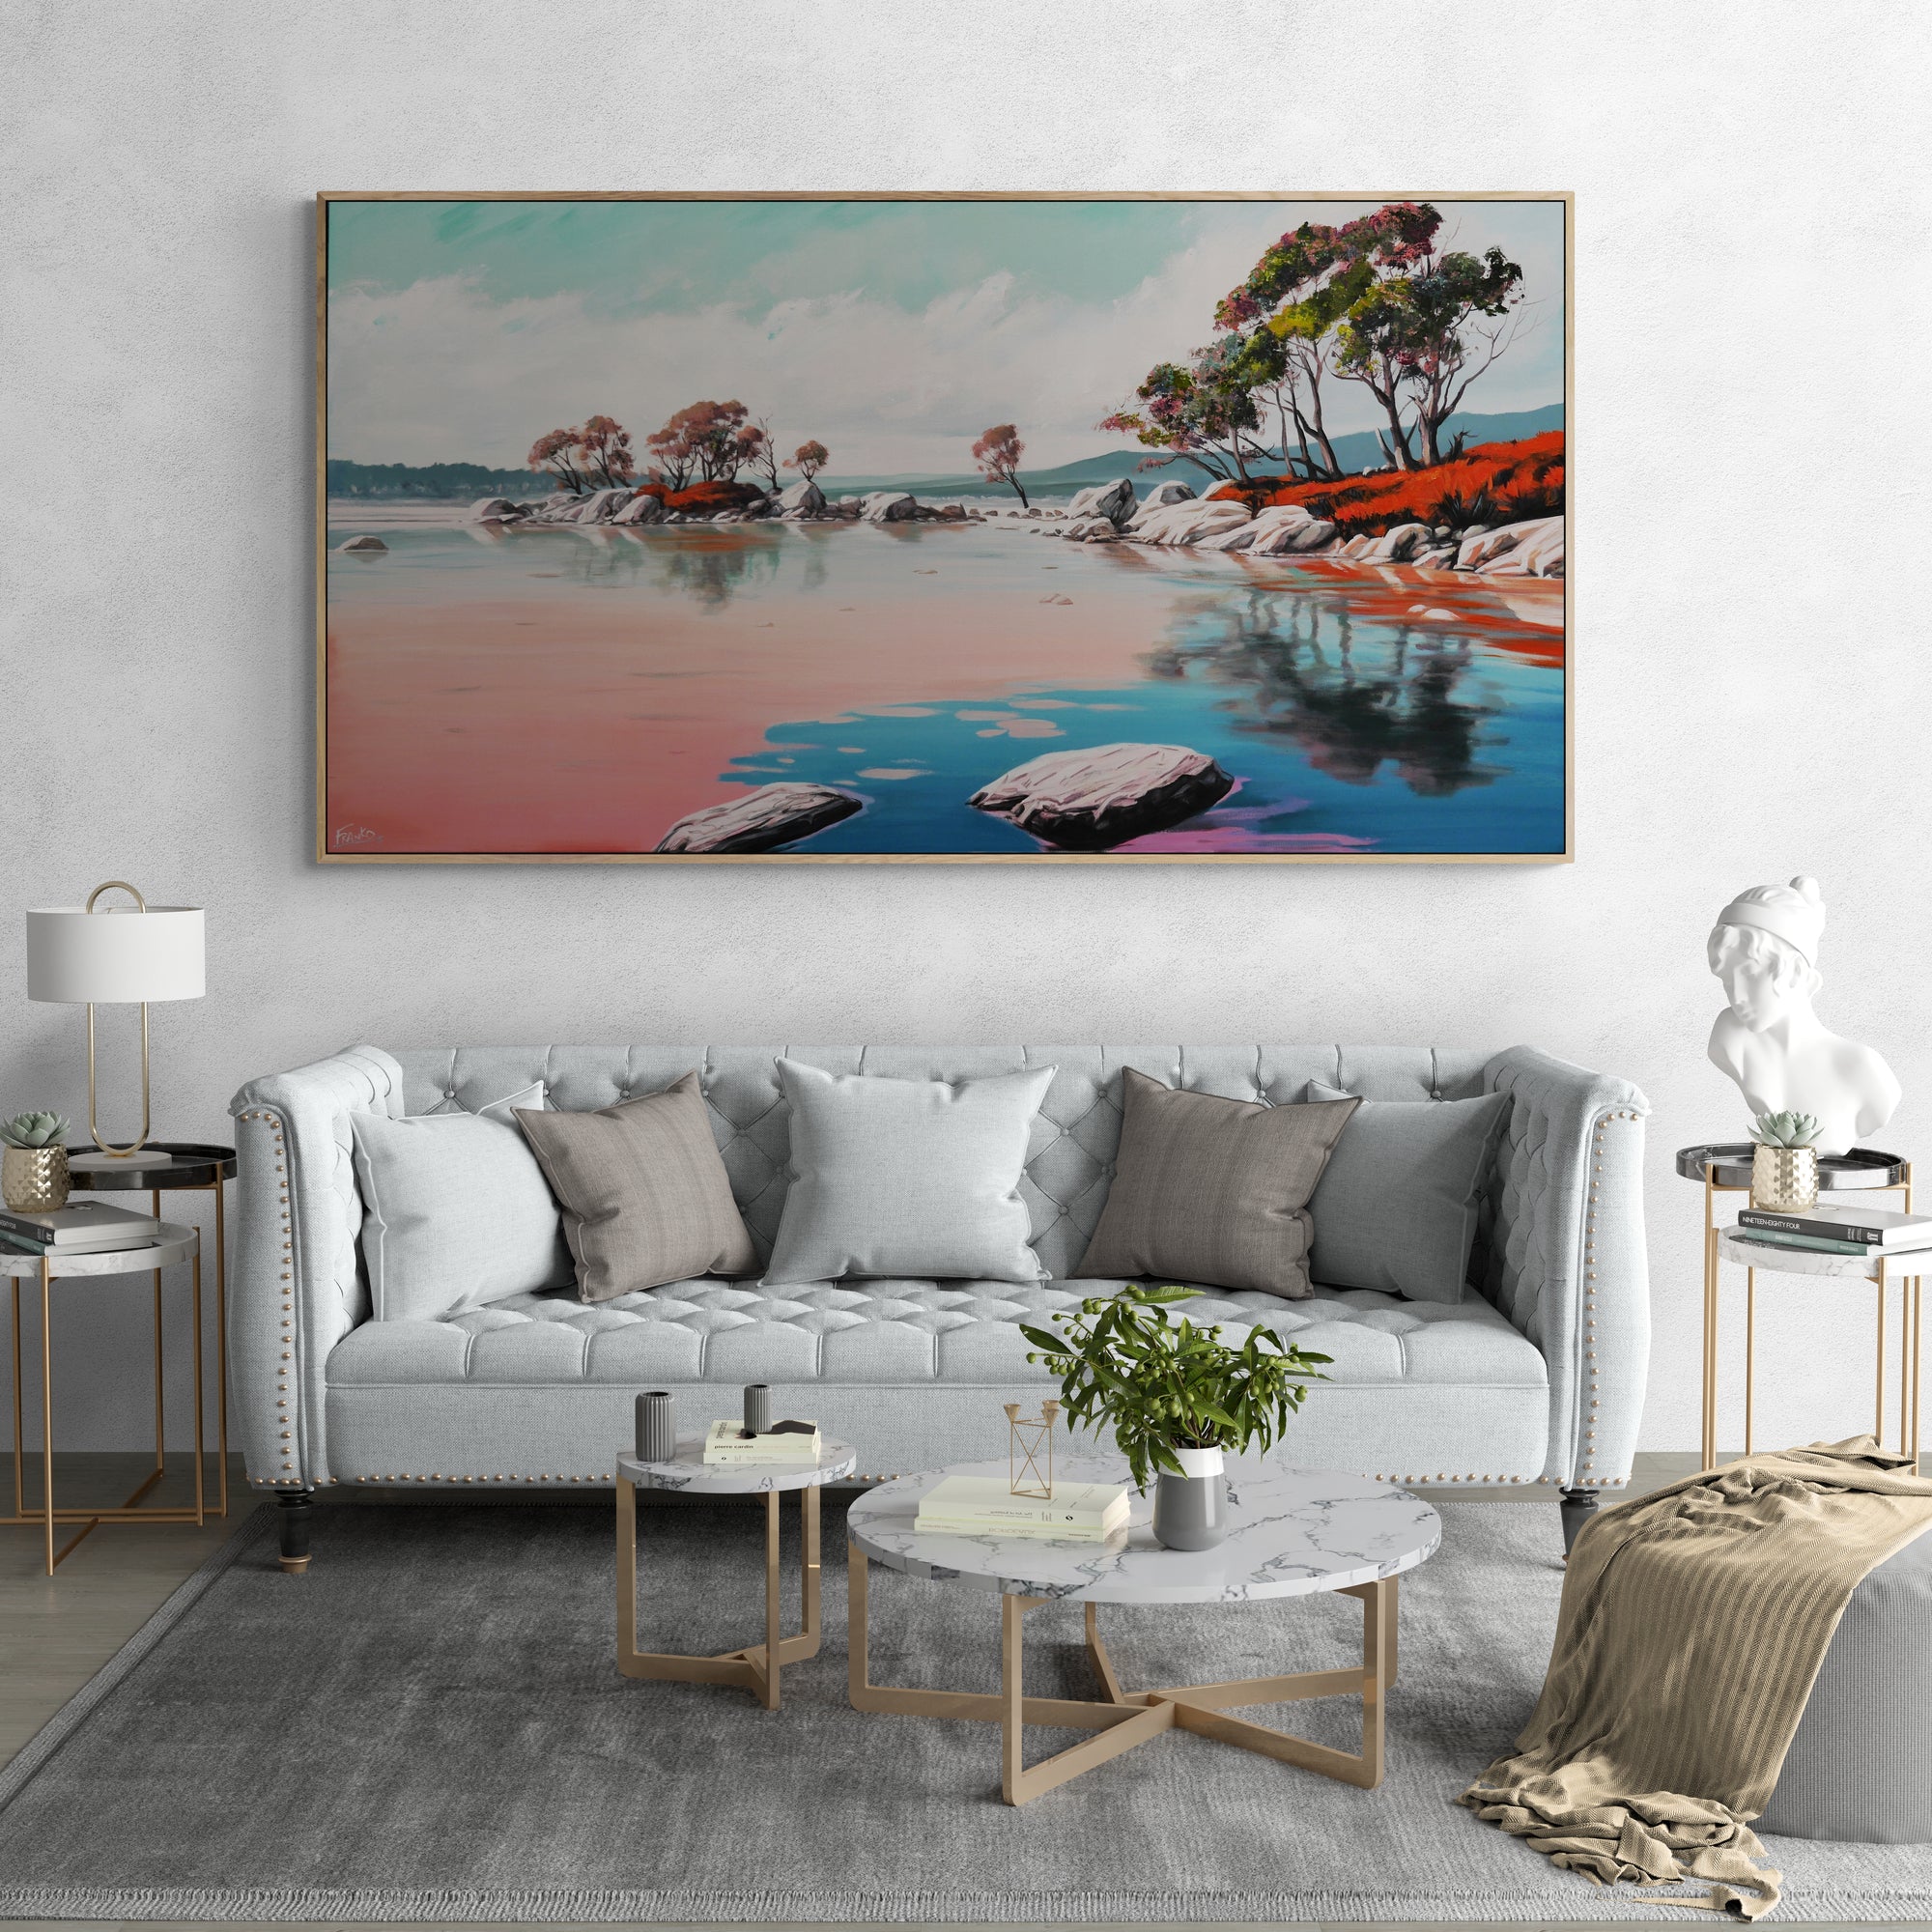 Tranquility Bay 190cm x 100cm Framed Neutral Palate Australian Landscape Abstract Painting (SOLD)